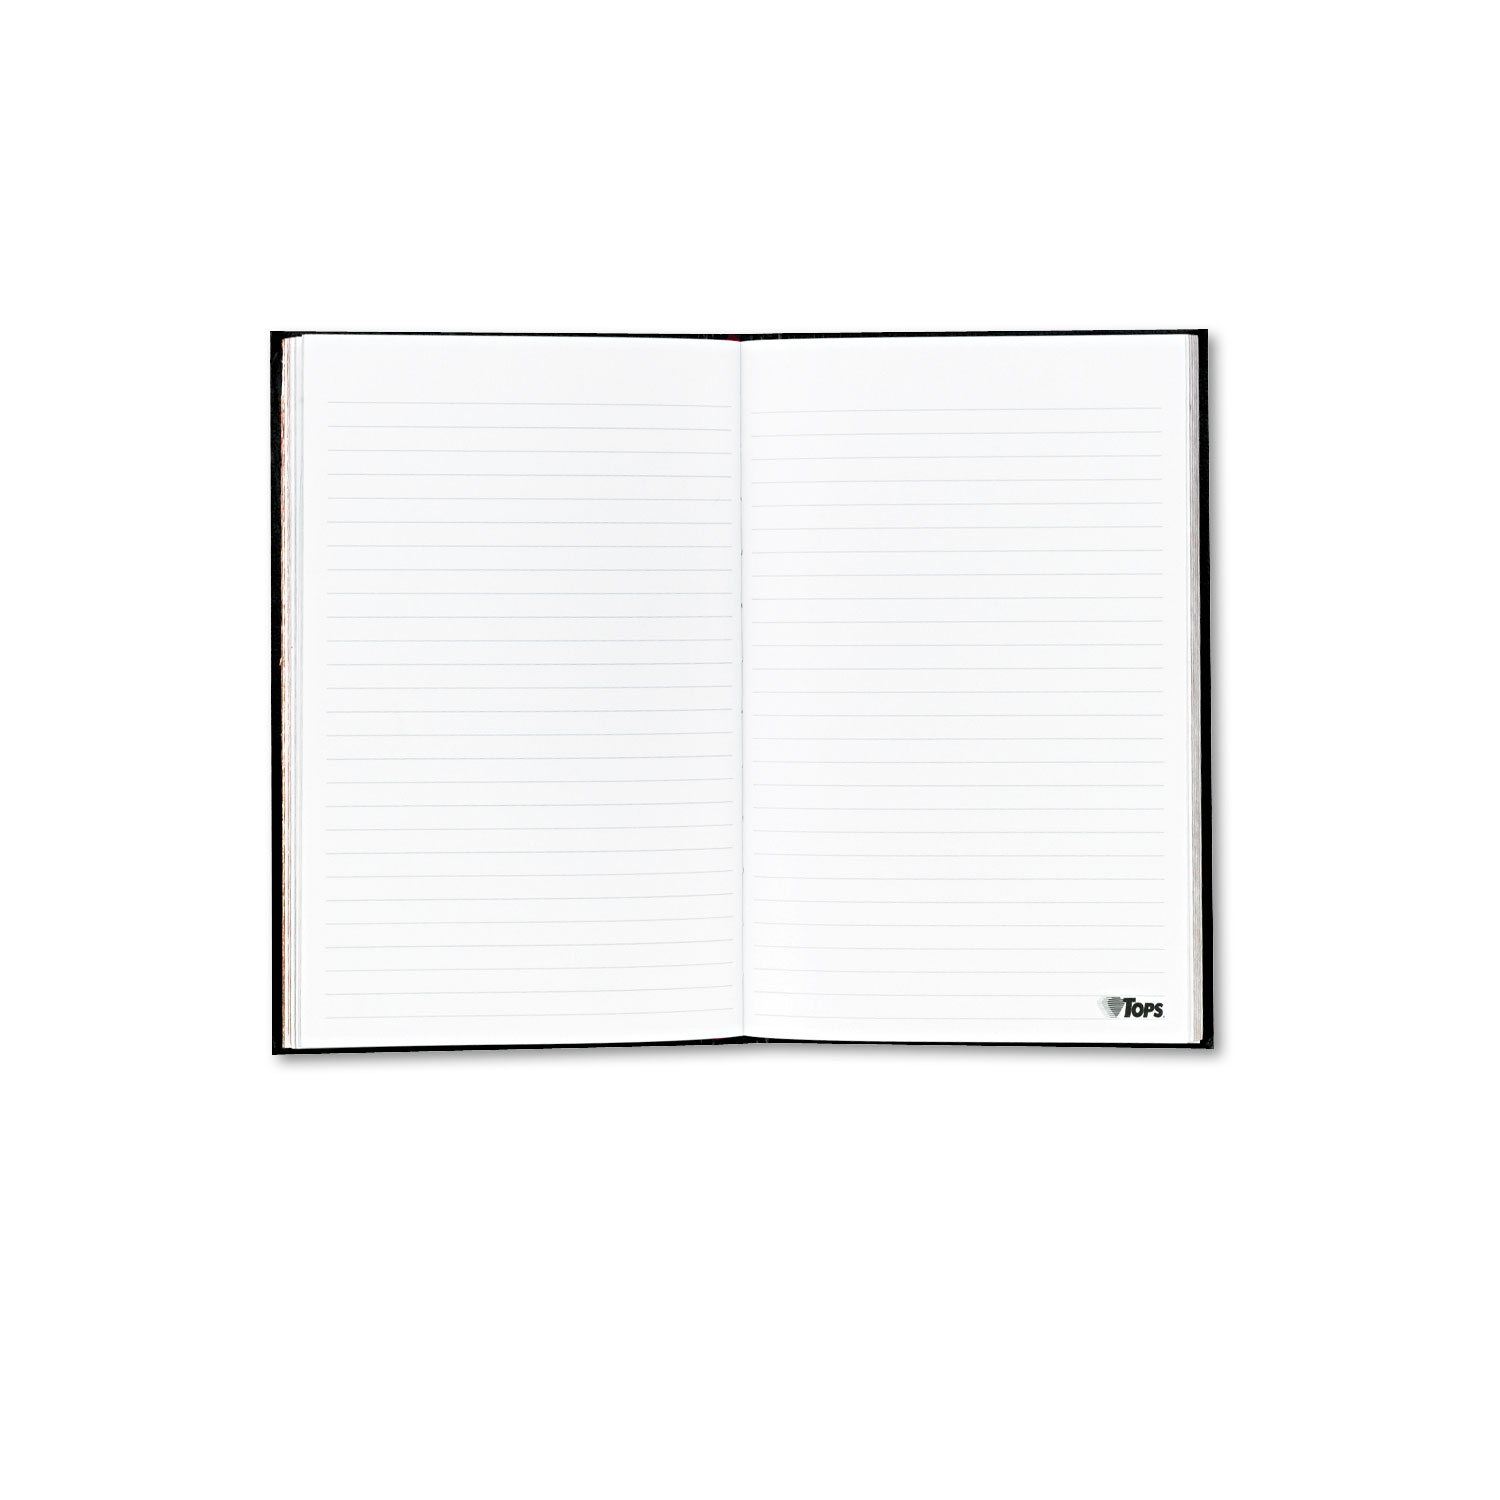 TOPS™ Professional Business Journal with Planning Pages, 160 Pages, 8 x 5, Black